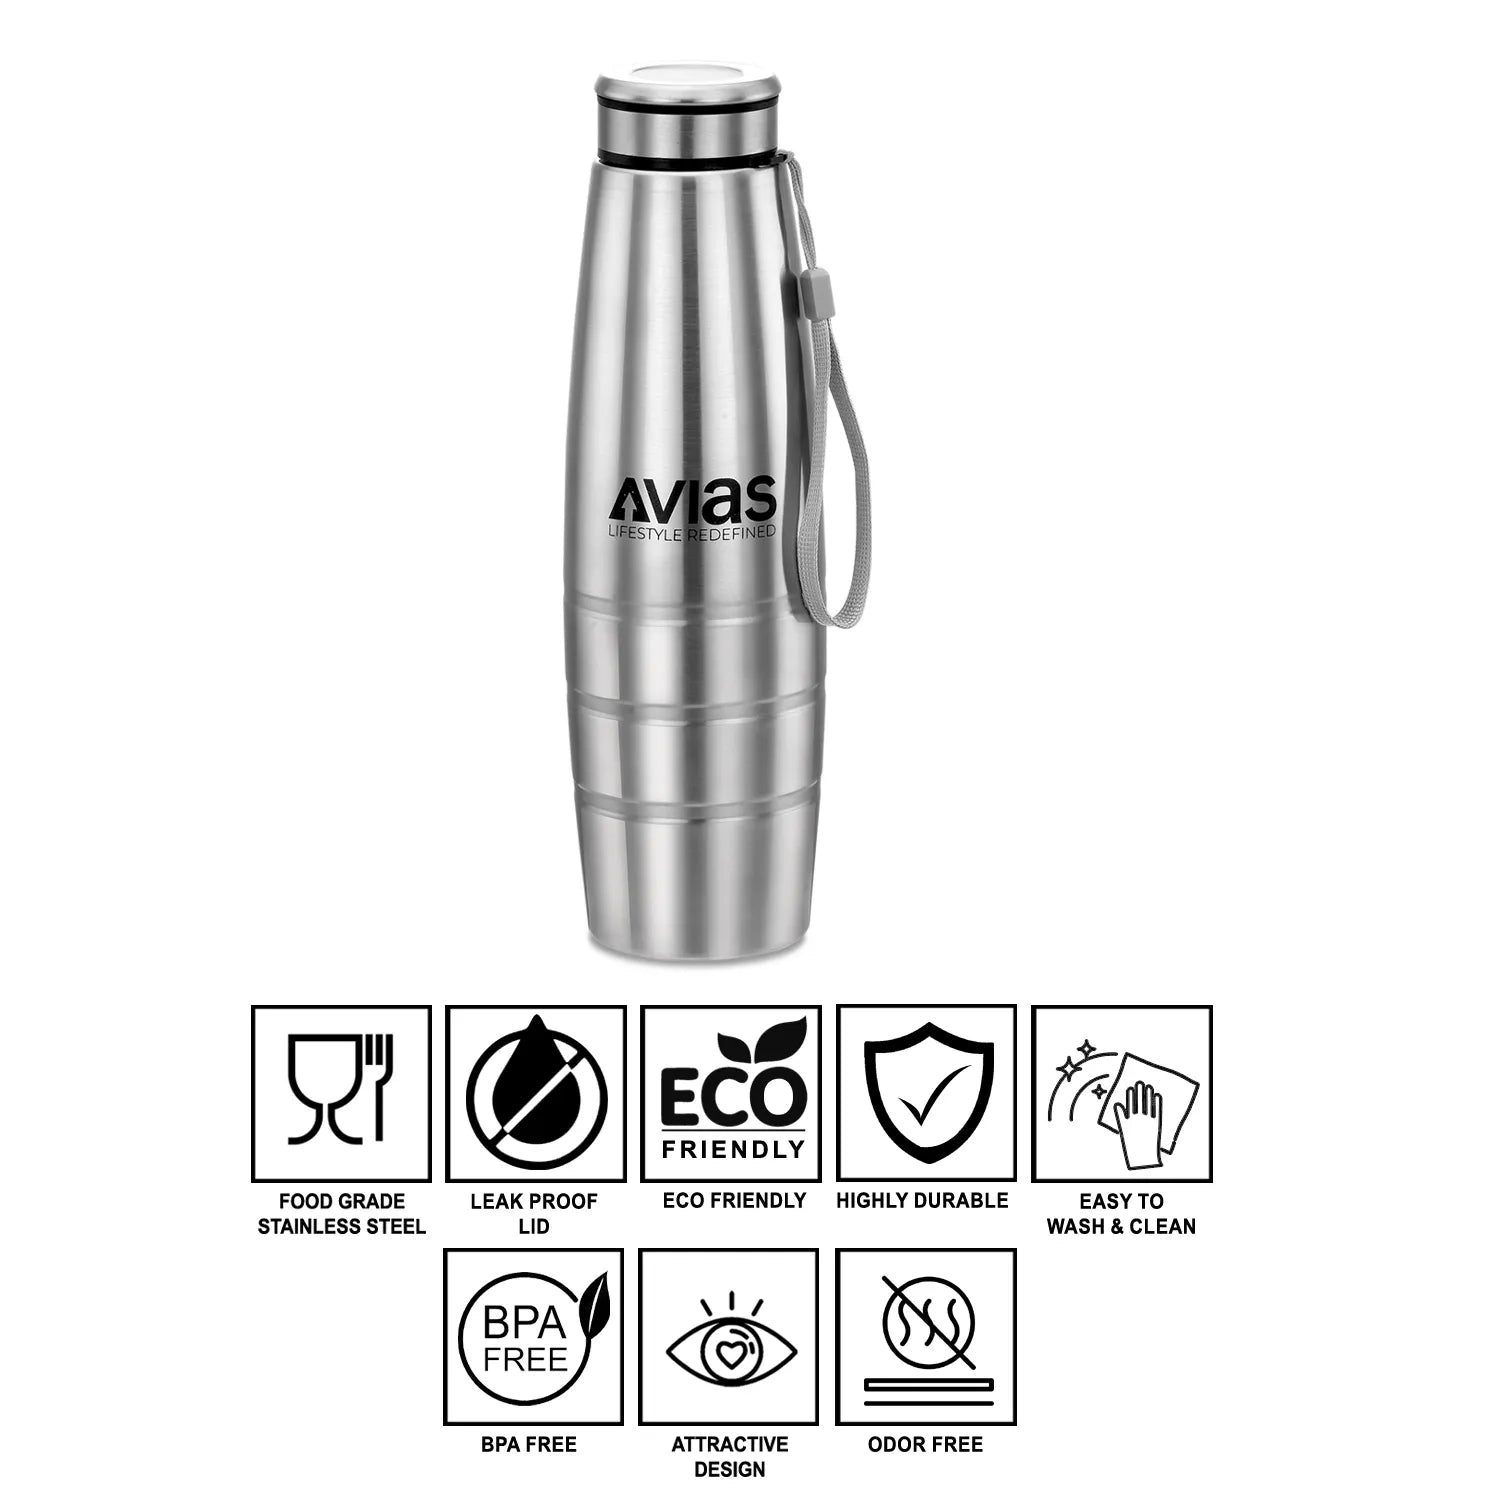 AVIAS Student’s Combo - Premia SS bottle 1000ml features